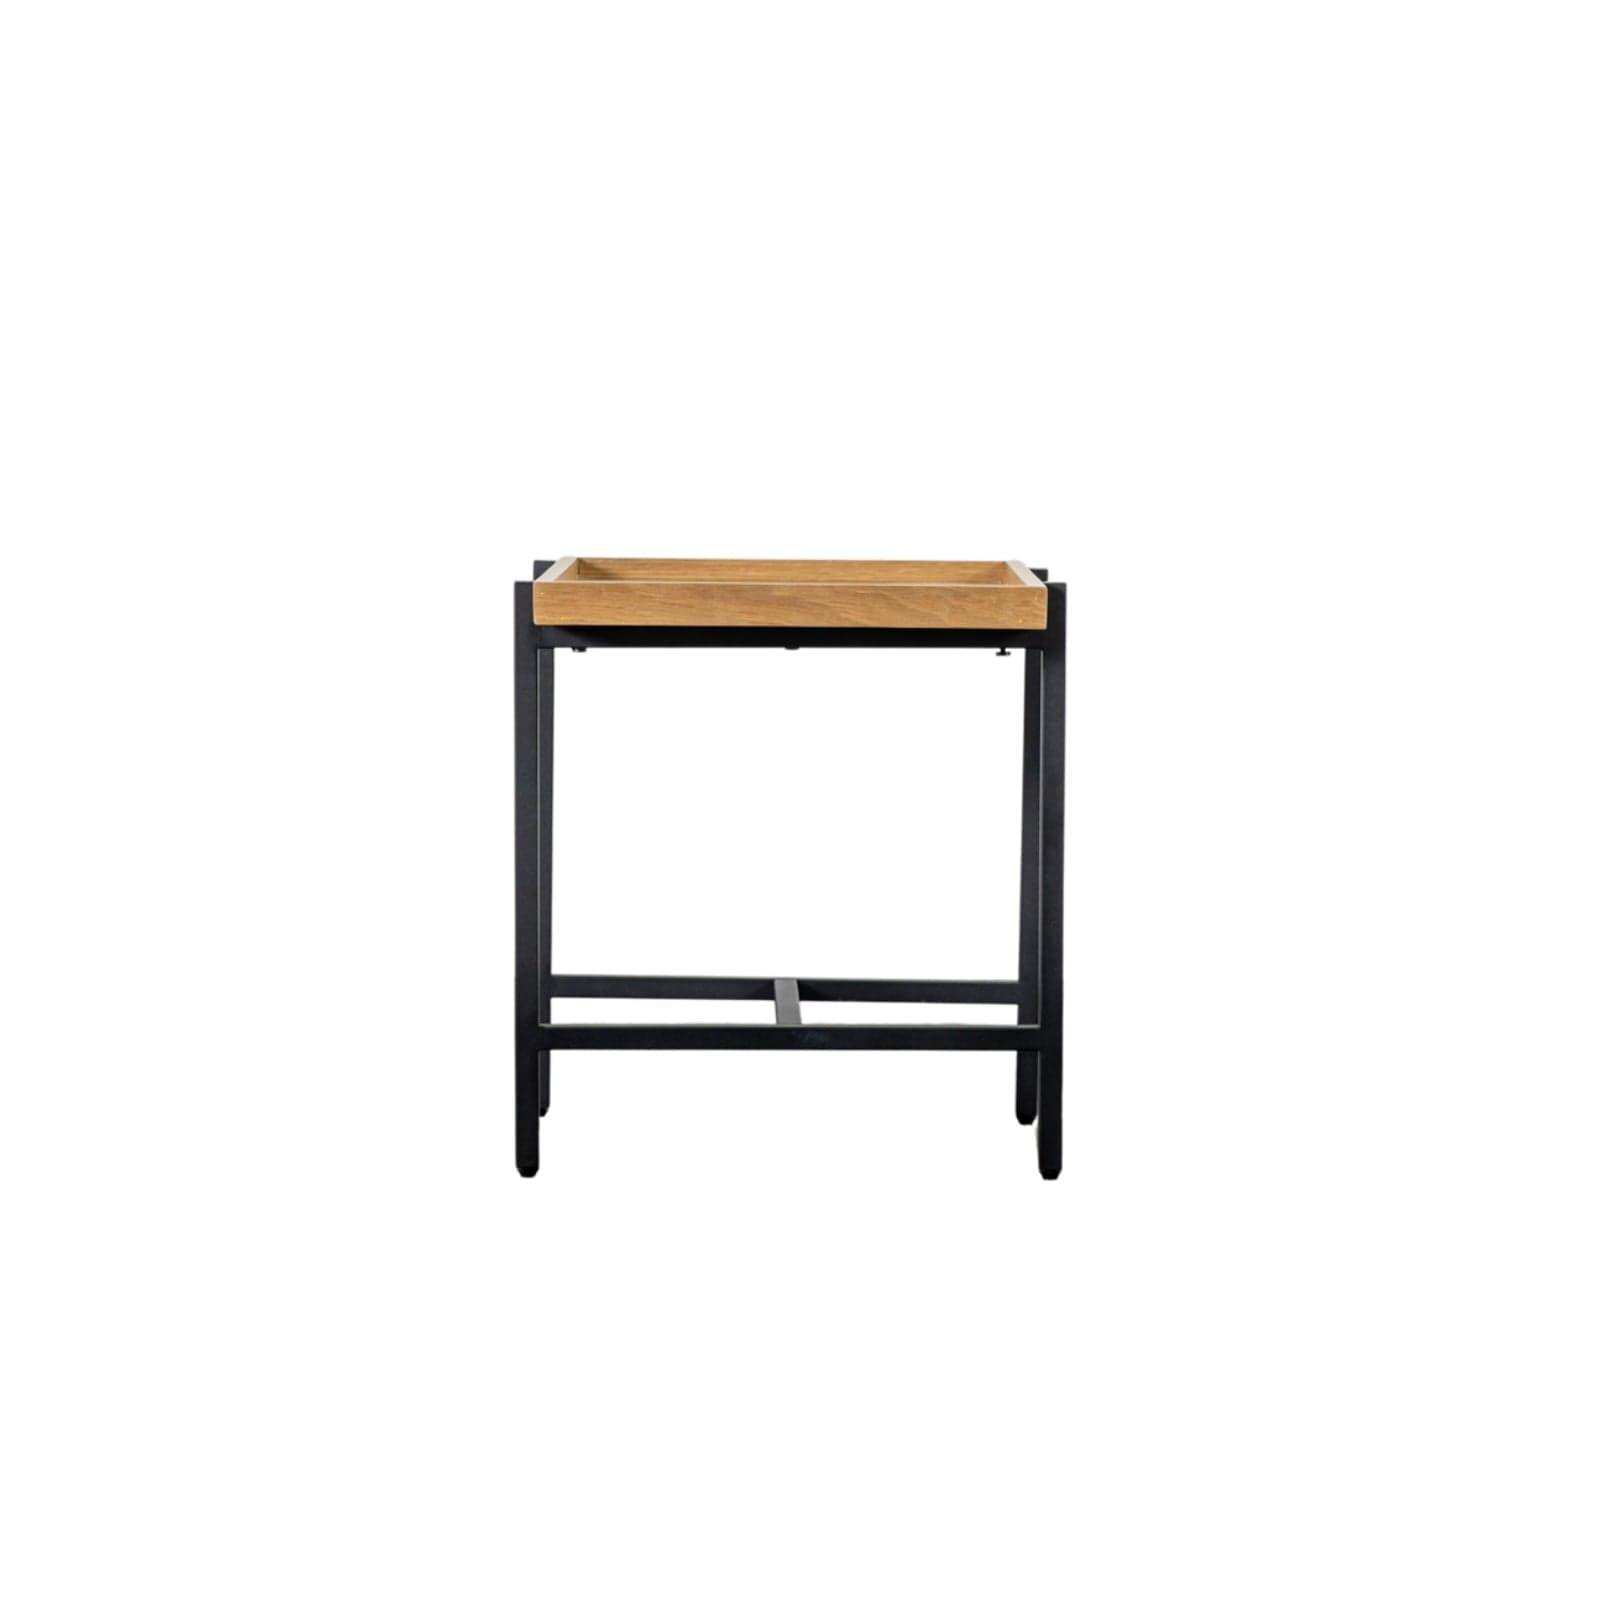 Metal and Lipped Wood Topped Square Side Table - The Farthing